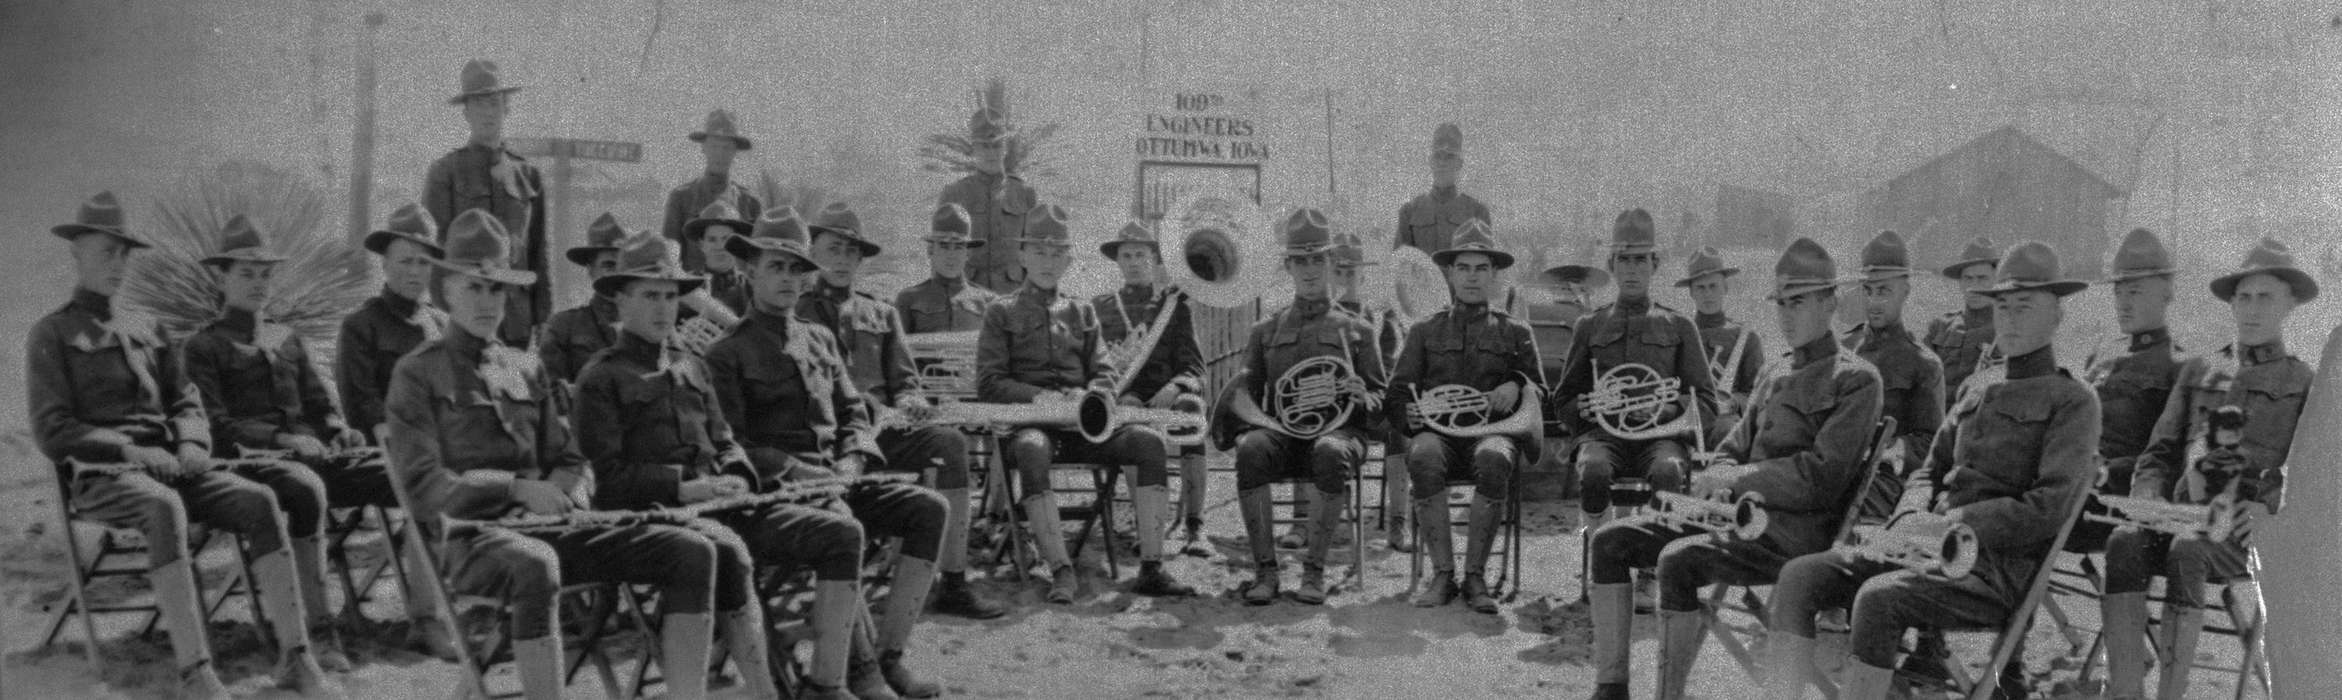 military, french horn, tuba, USA, Iowa, Portraits - Group, trumpet, Military and Veterans, Iowa History, history of Iowa, band, Lemberger, LeAnn, flute